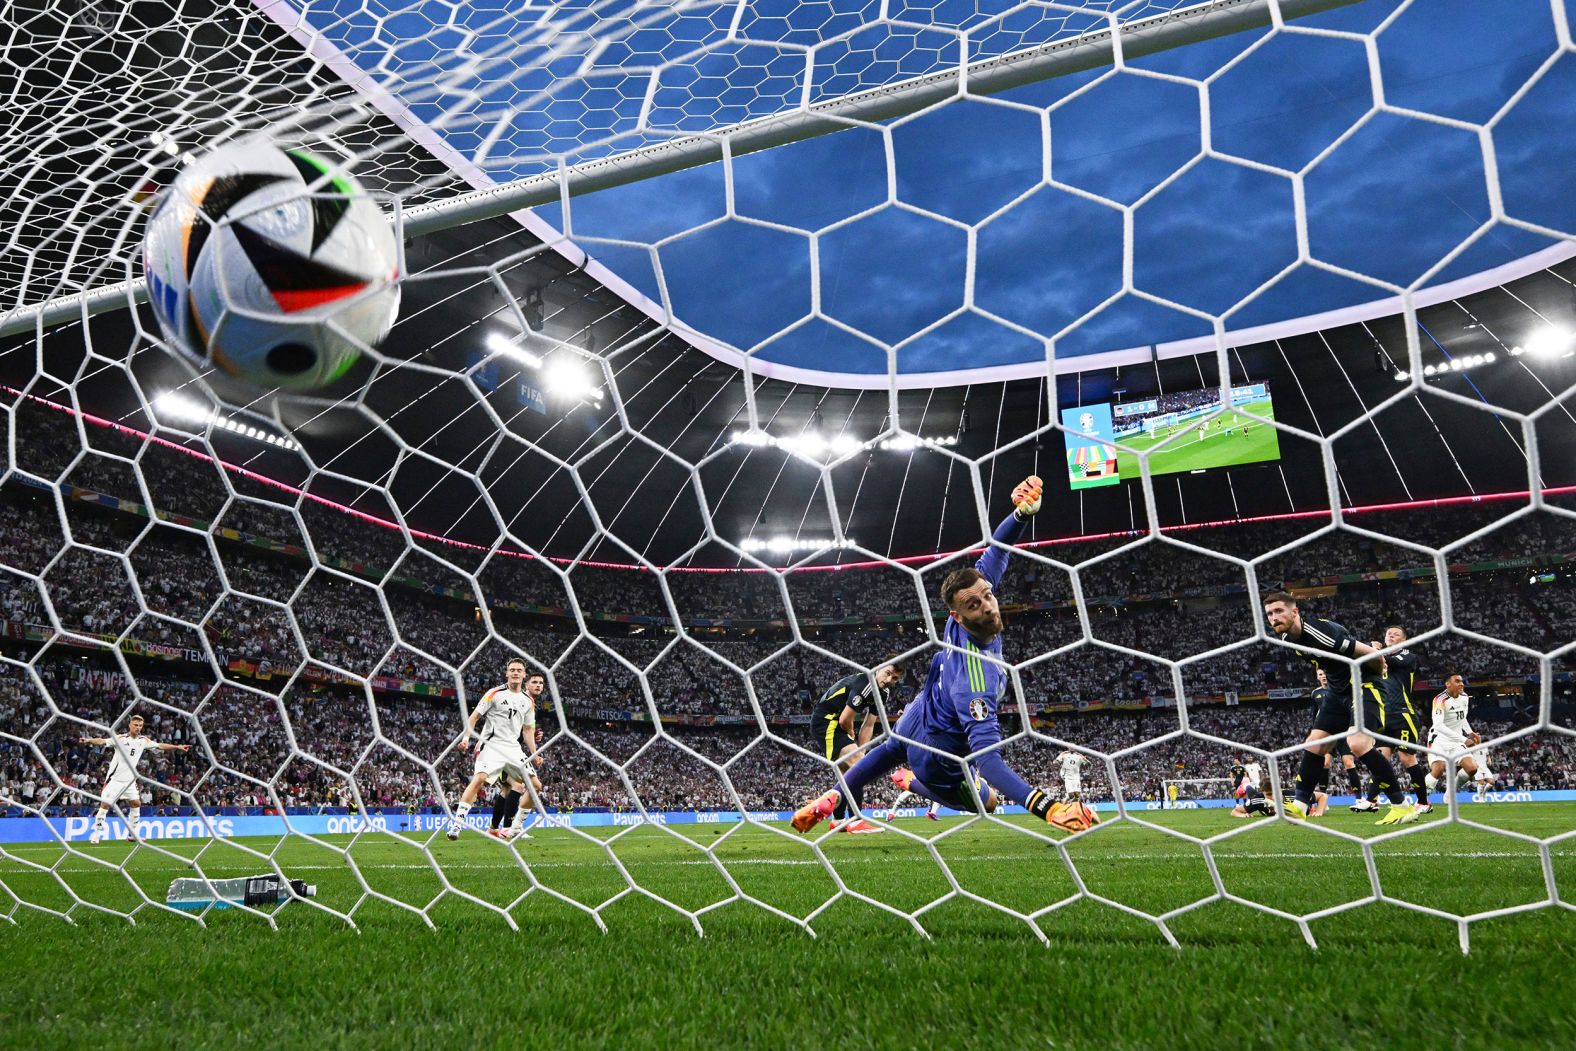 Germany's Jamal Musiala, in white on the right, scores a goal against Scotland during the opening match of Euro 2024 on Friday, June 14. Germany, the host nation, <a href="https://www.cnn.com/2024/06/14/sport/germany-scotland-euro-2024-spt-intl/index.html">won 5-1</a>.